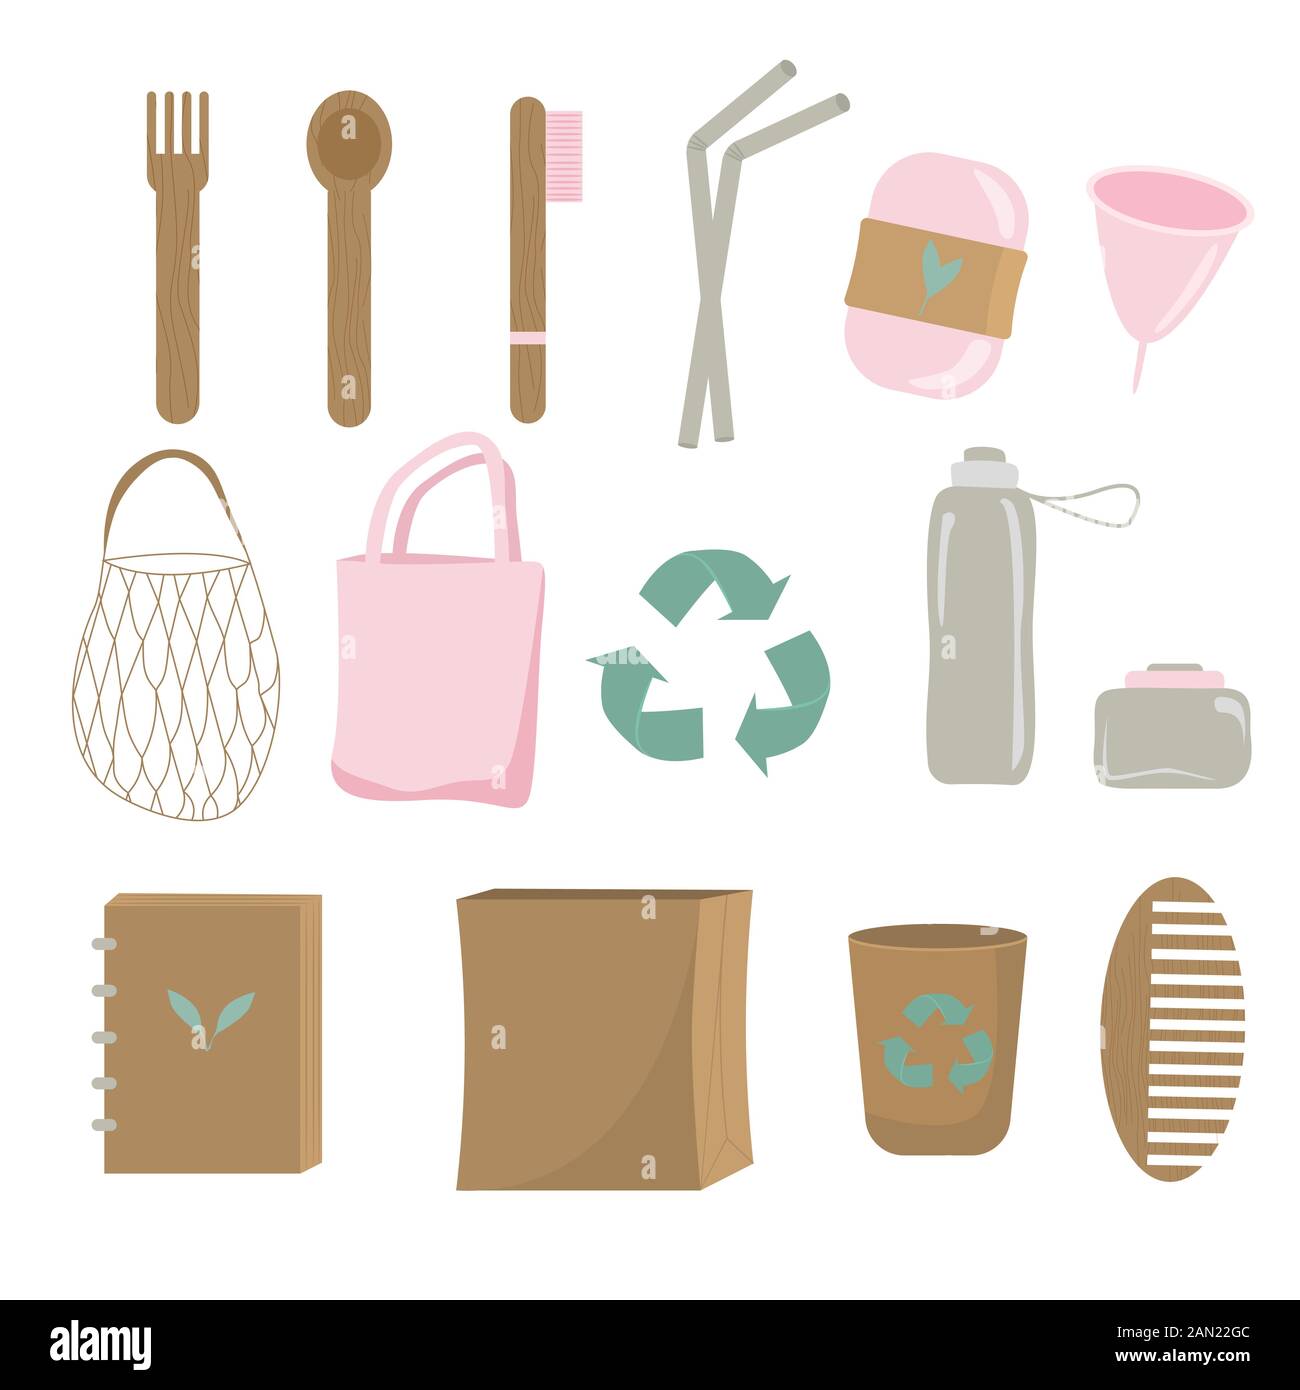 https://c8.alamy.com/comp/2AN22GC/reuse-elements-zero-waste-household-items-icon-set-vector-graphic-illustration-2AN22GC.jpg